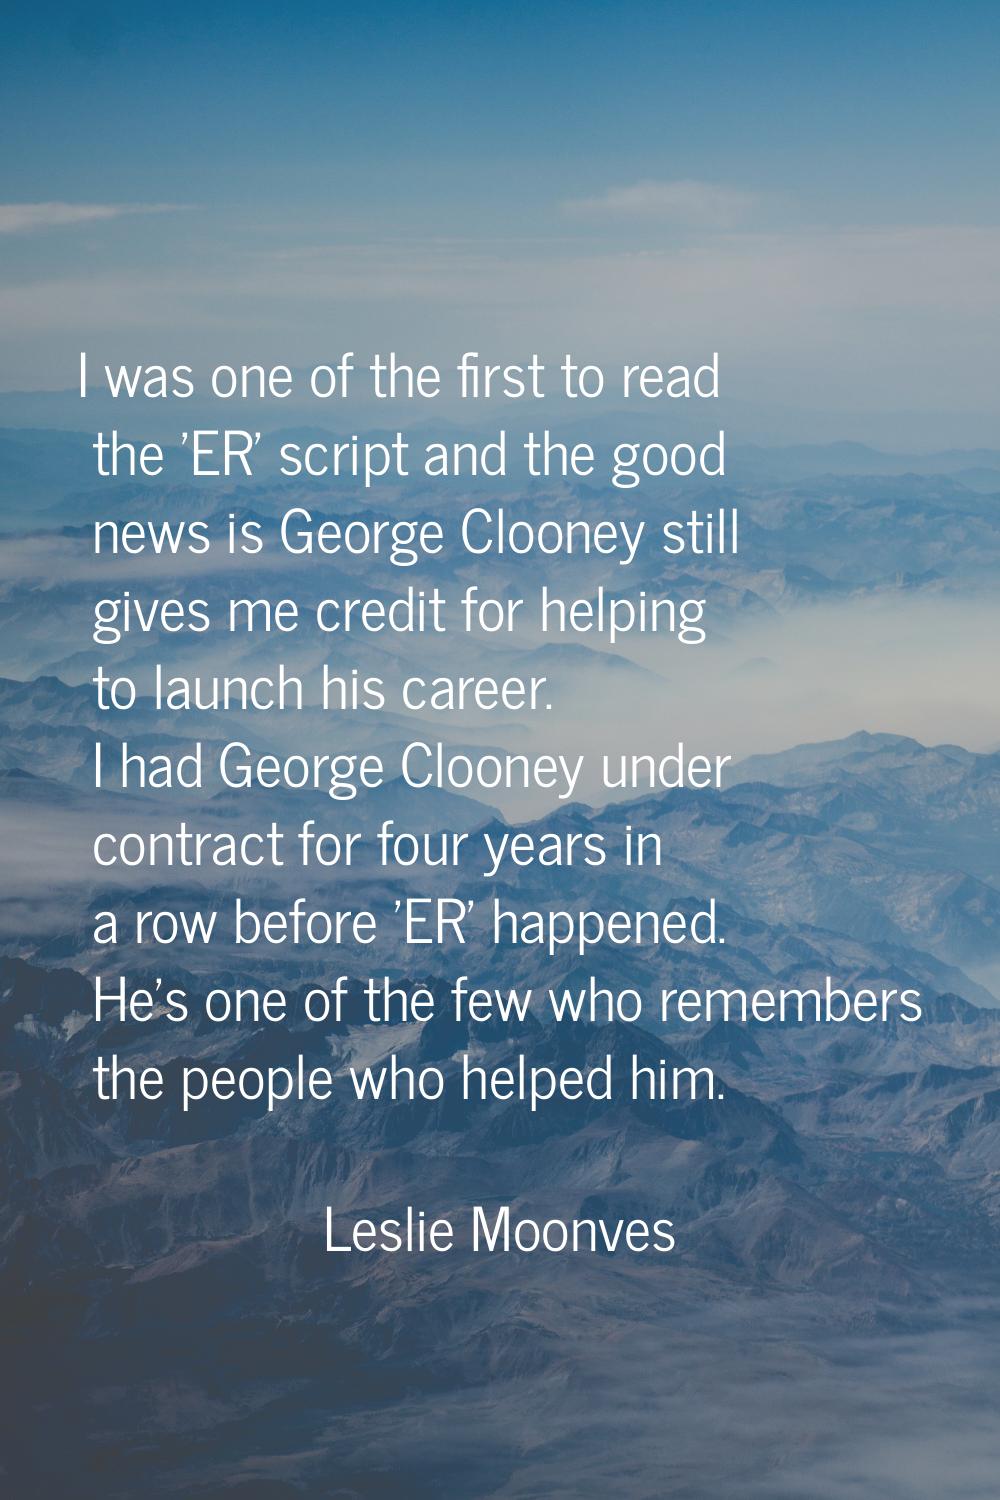 I was one of the first to read the 'ER' script and the good news is George Clooney still gives me c